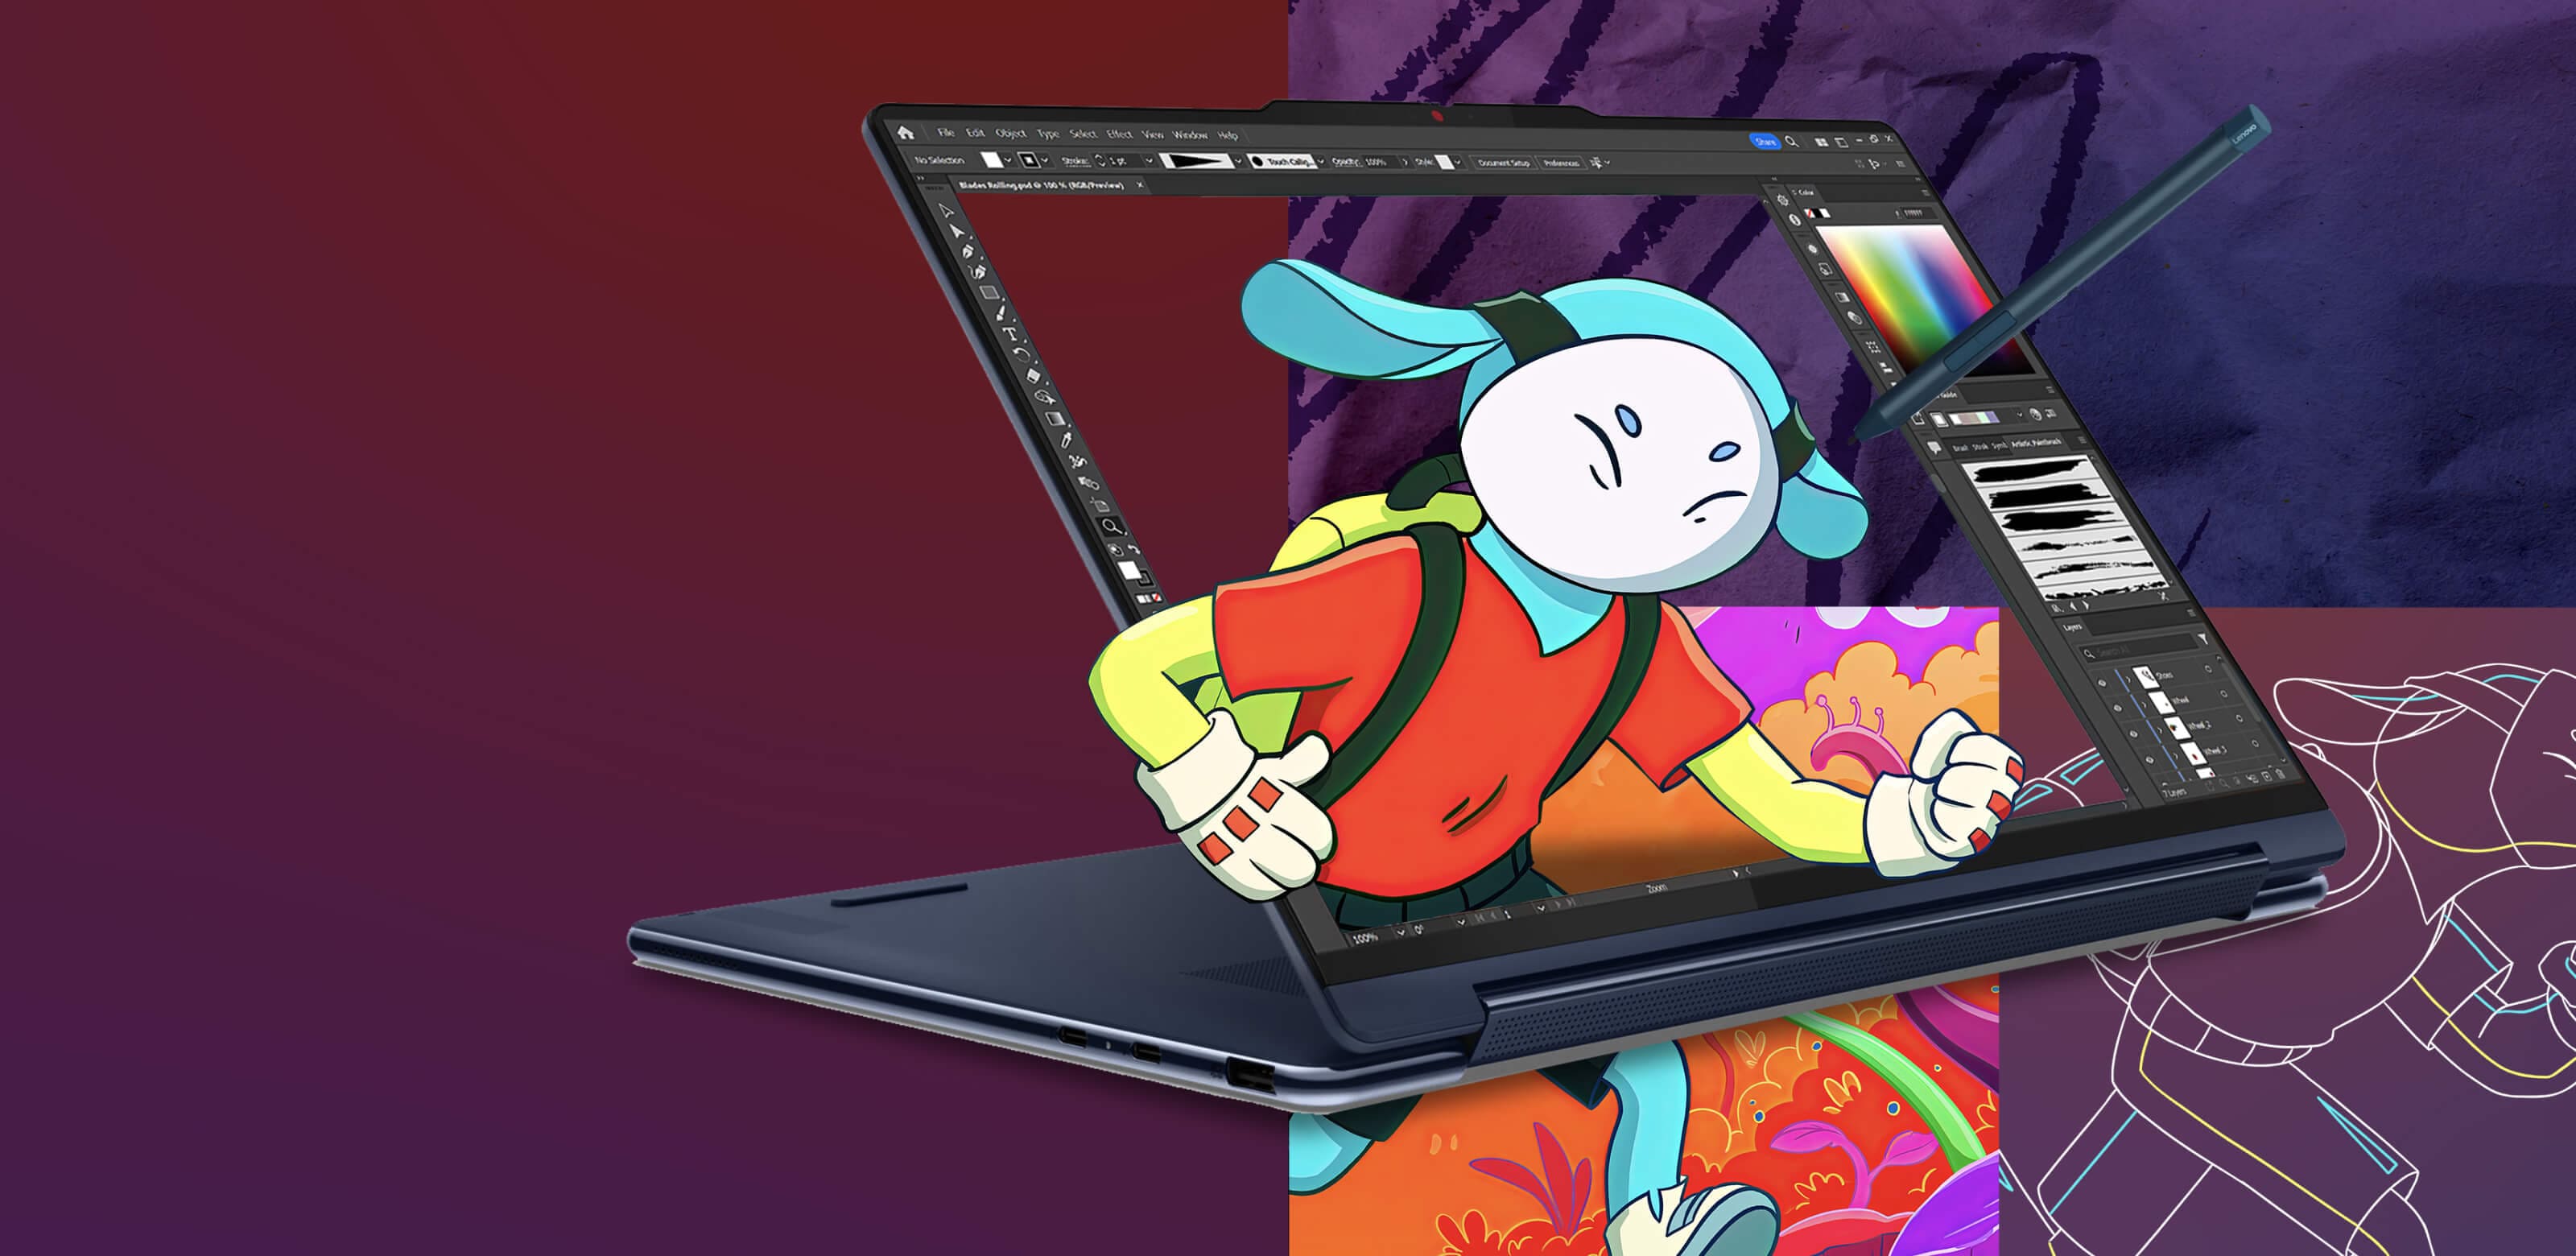 Lenovo Yoga laptop in stand mode, displaying an image editor program on the screen with an animation character breaking out of the screen.